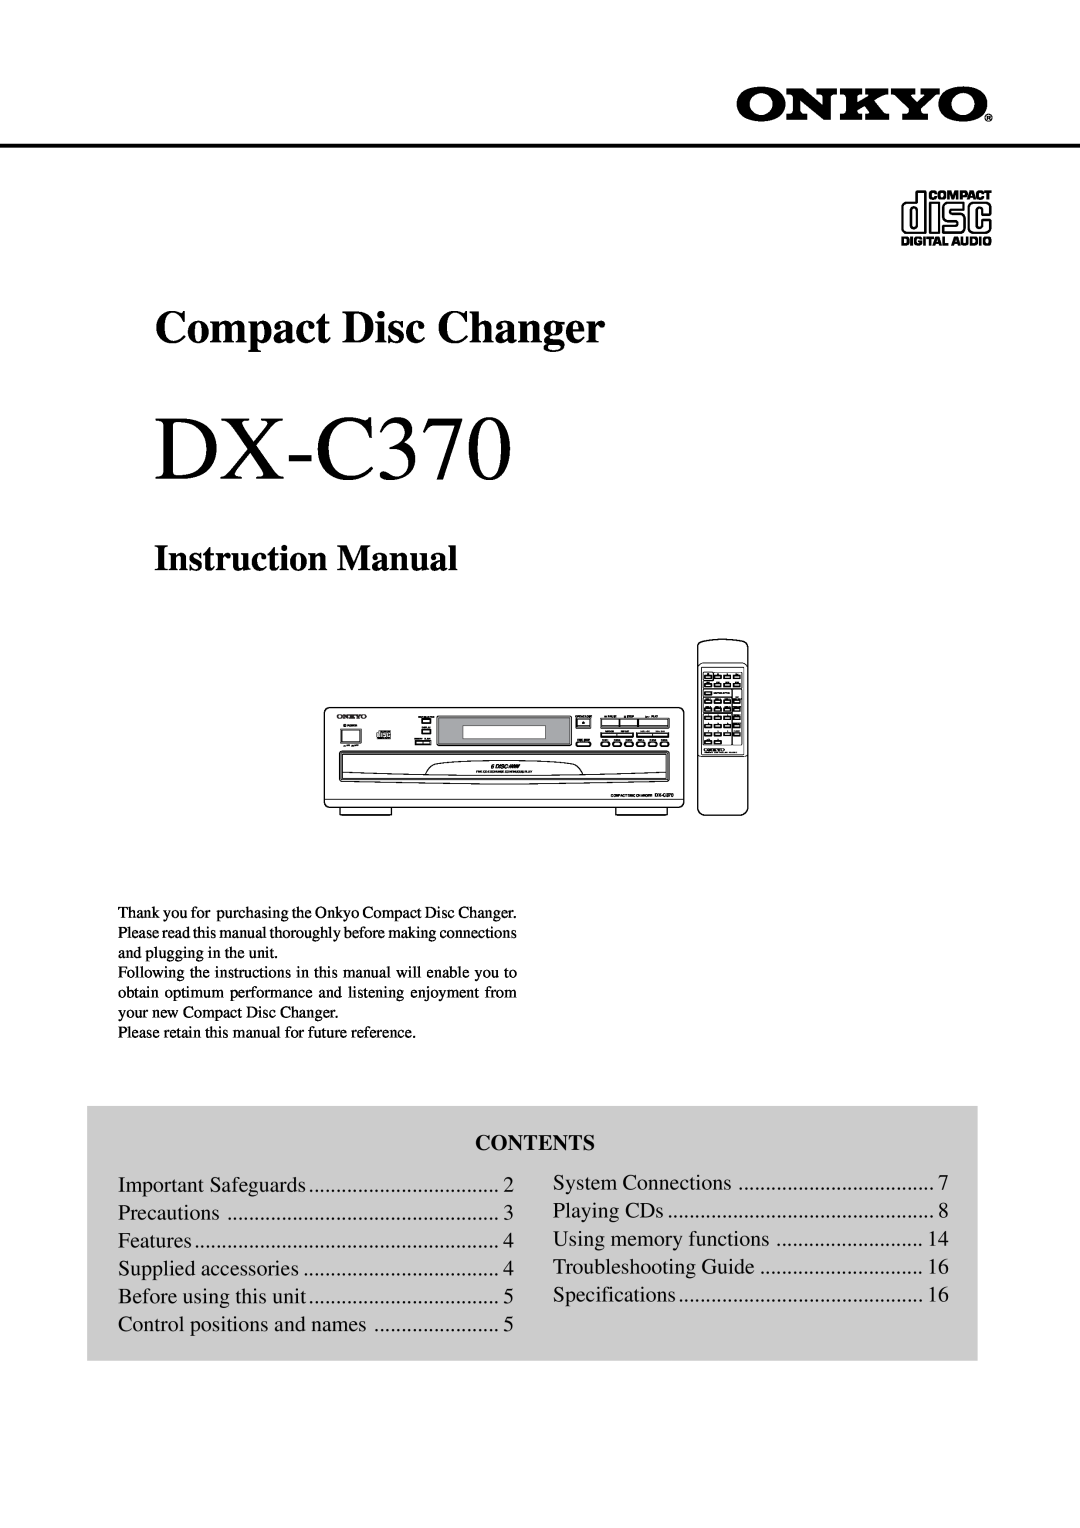 Onkyo DX-C370 instruction manual System Connections, Playing CDs, Using memory functions, Troubleshooting Guide, Contents 